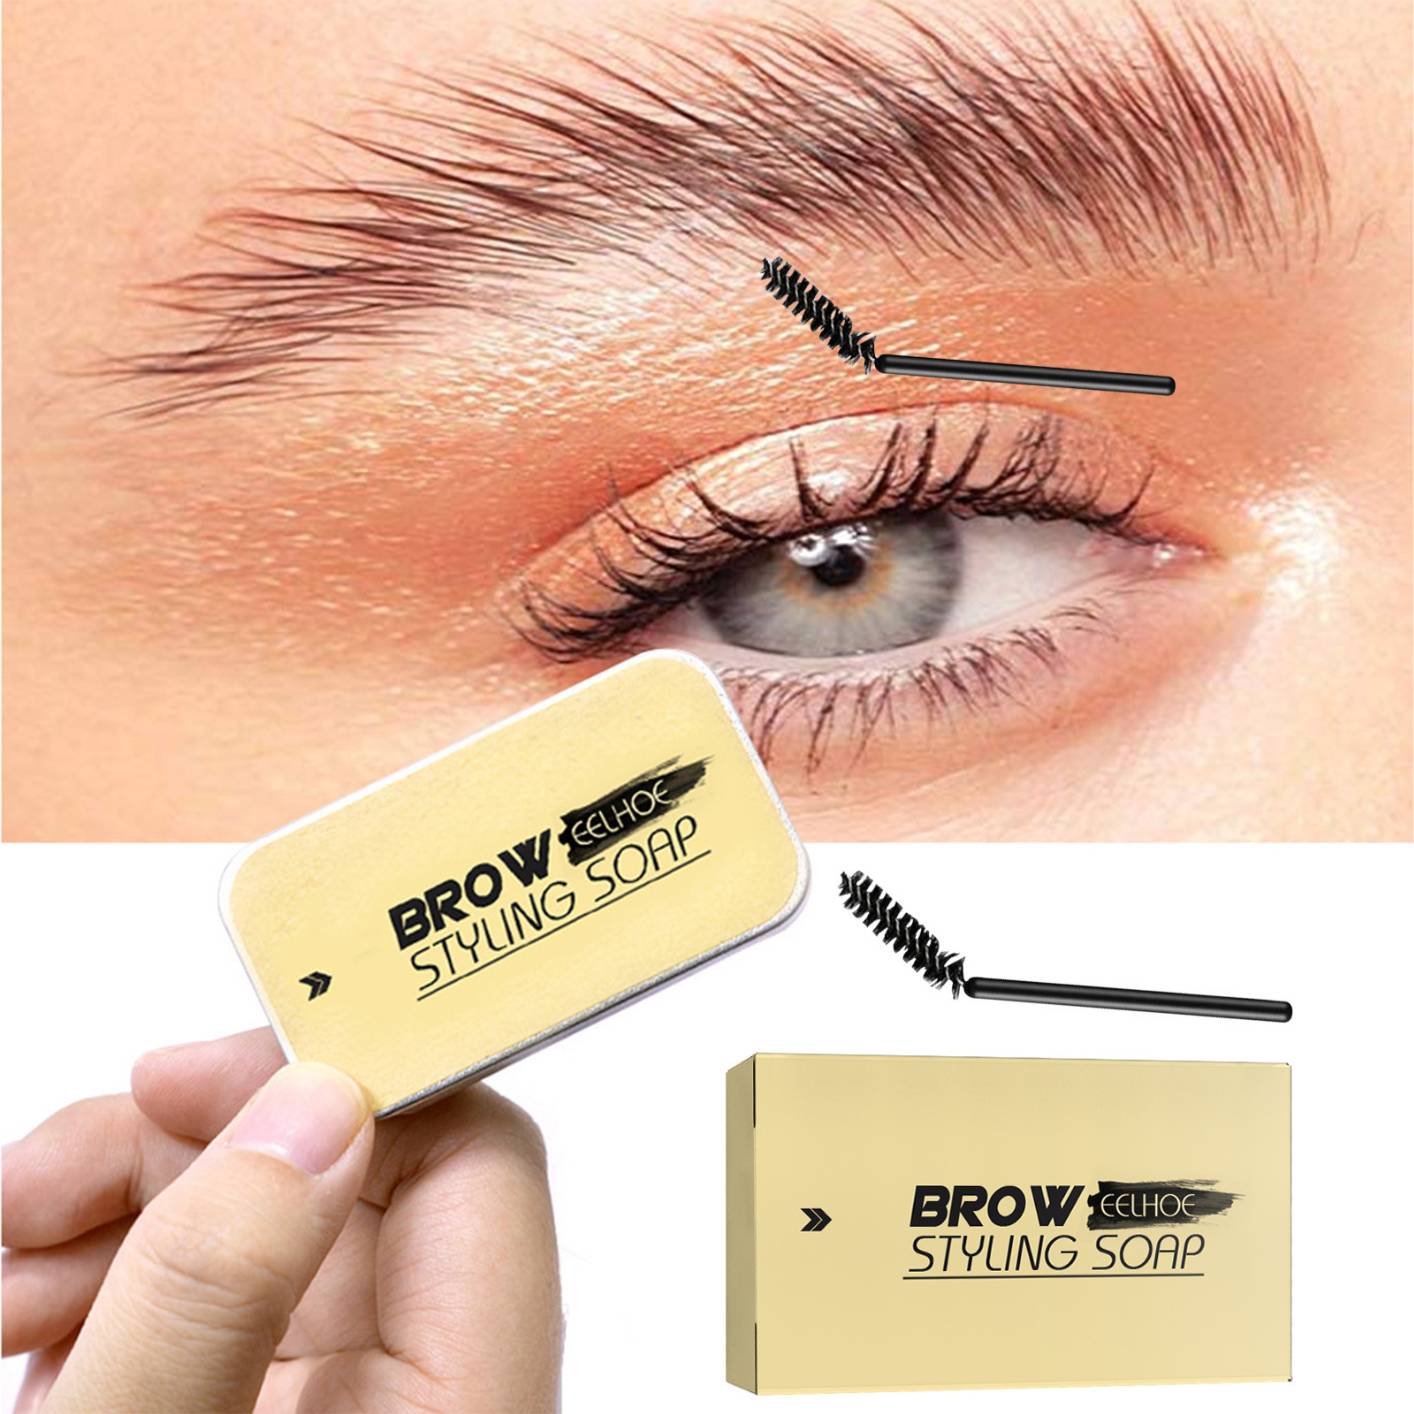 Eyebrow Soap Kit,Brows Styling Soap,Long Lasting Waterproof Smudge Proof Eyebrow Styling Pomade for Natural Brows, 3D Feathery Brows Makeup Balm